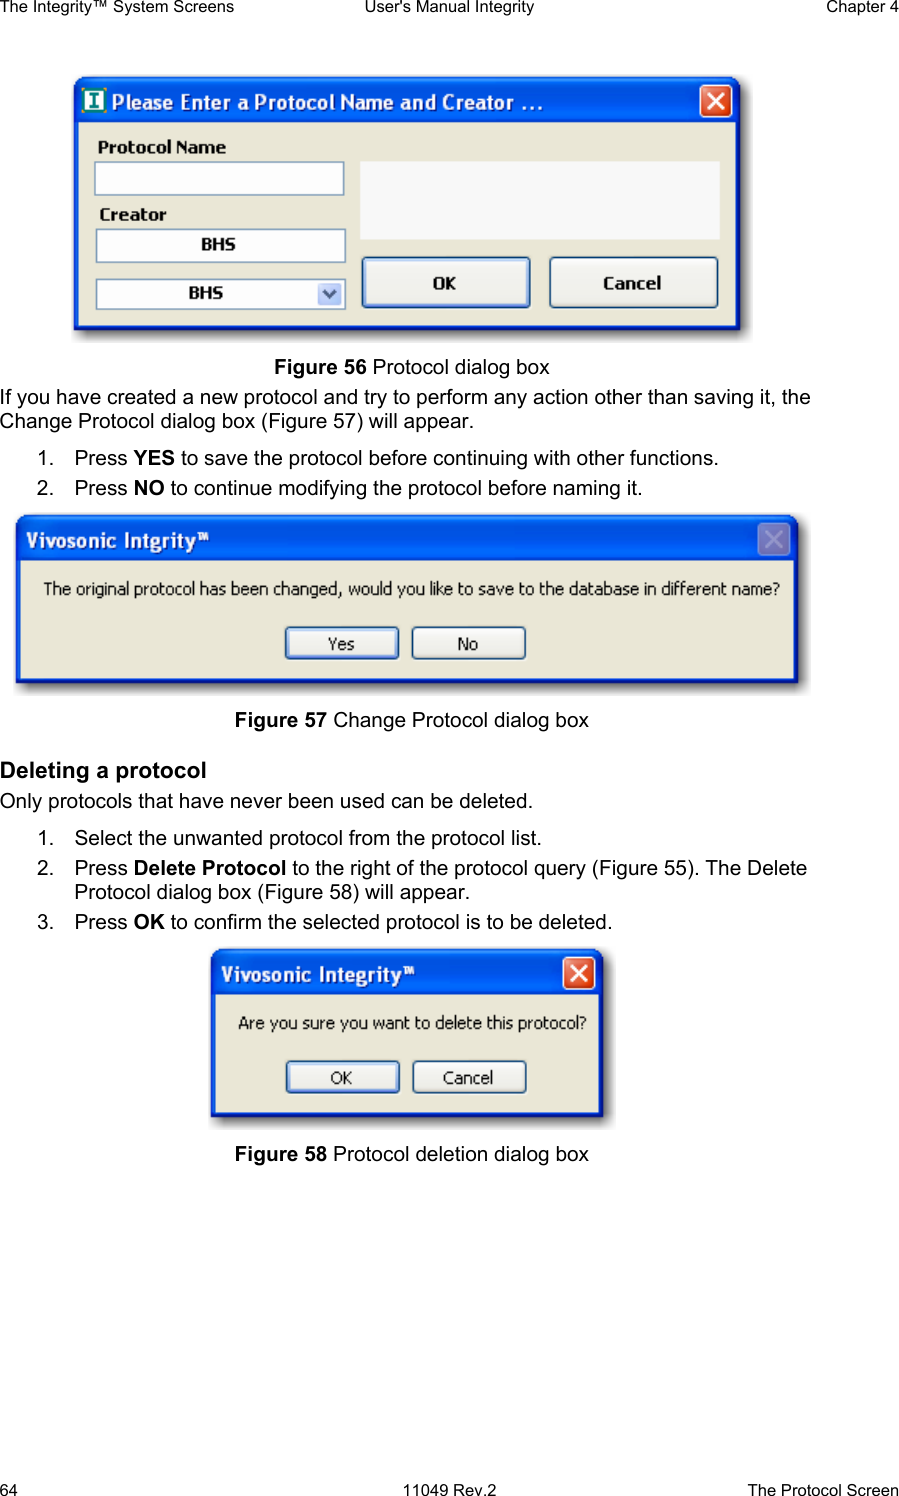 The Integrity™ System Screens  User&apos;s Manual Integrity  Chapter 4  64  11049 Rev.2  The Protocol Screen  Figure 56 Protocol dialog box                        If you have created a new protocol and try to perform any action other than saving it, the Change Protocol dialog box (Figure 57) will appear.  1. Press YES to save the protocol before continuing with other functions.  2. Press NO to continue modifying the protocol before naming it.   Figure 57 Change Protocol dialog box Deleting a protocol Only protocols that have never been used can be deleted.  1.  Select the unwanted protocol from the protocol list. 2. Press Delete Protocol to the right of the protocol query (Figure 55). The Delete Protocol dialog box (Figure 58) will appear.  3. Press OK to confirm the selected protocol is to be deleted.  Figure 58 Protocol deletion dialog box 